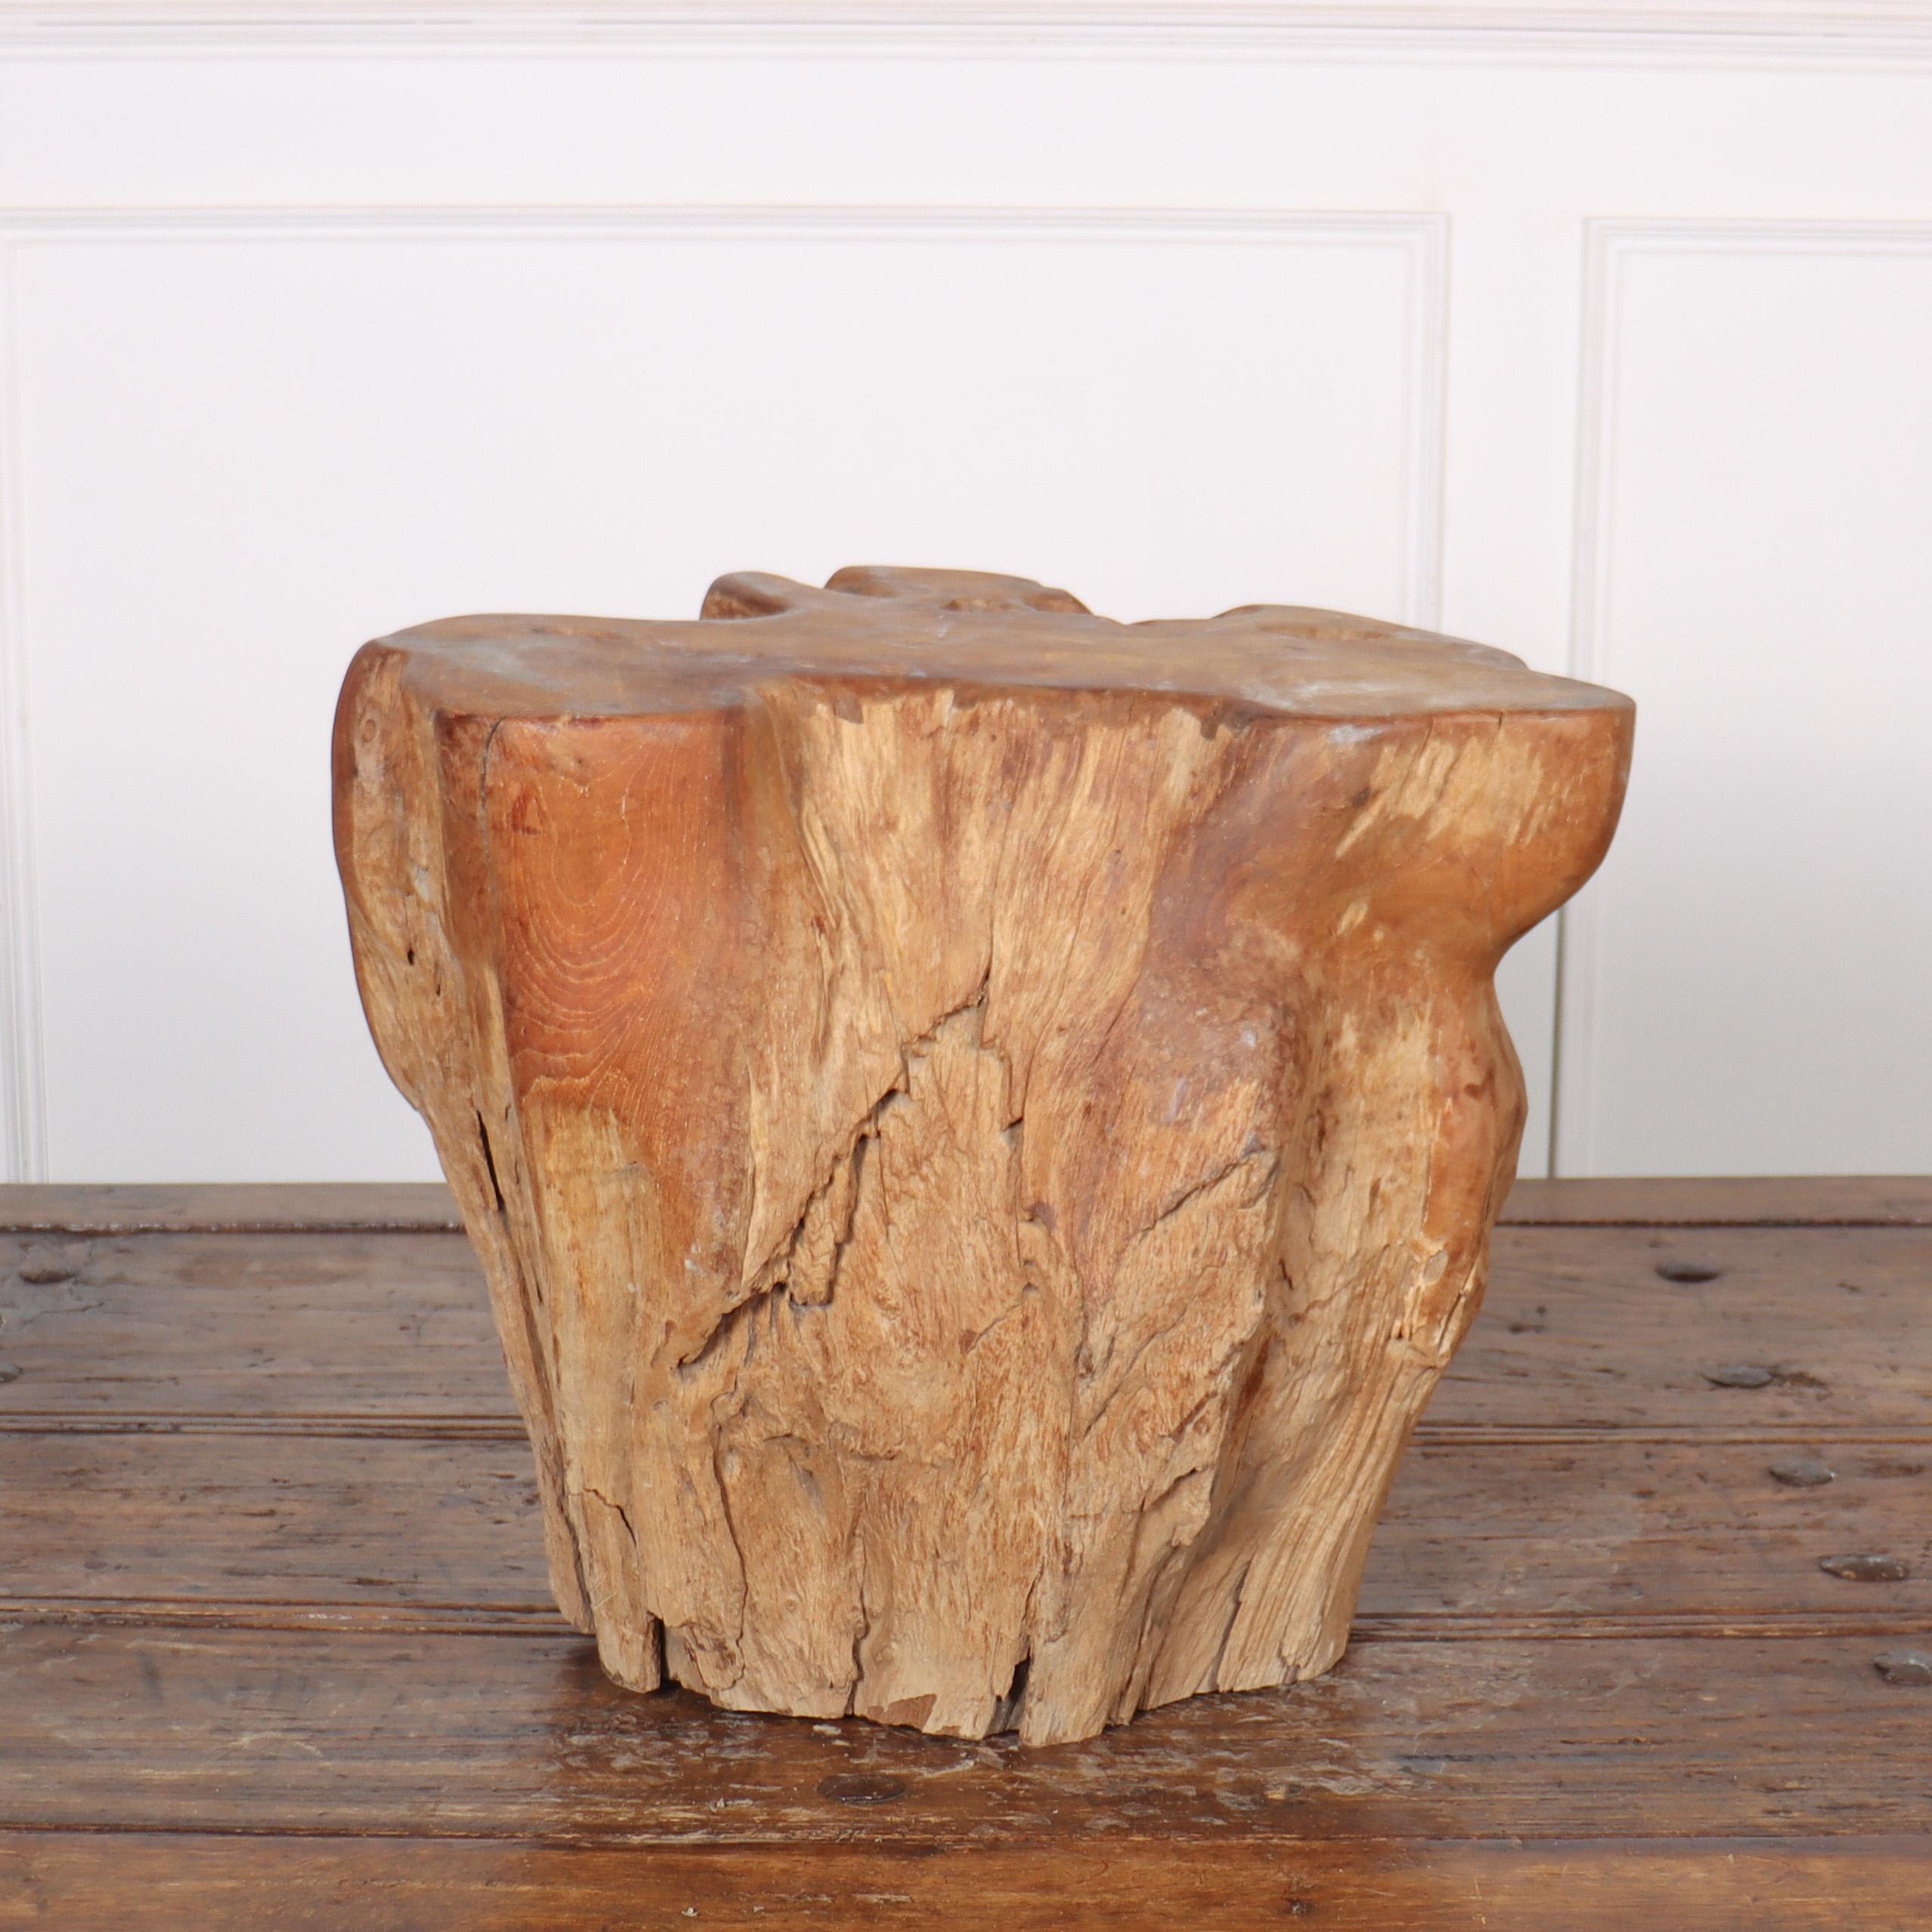 Sculptural rustic root side table.

Ref: C.

Reference: 8146

Dimensions
22 inches (56 cms) Wide
20 inches (51 cms) Deep
18.5 inches (47 cms) High